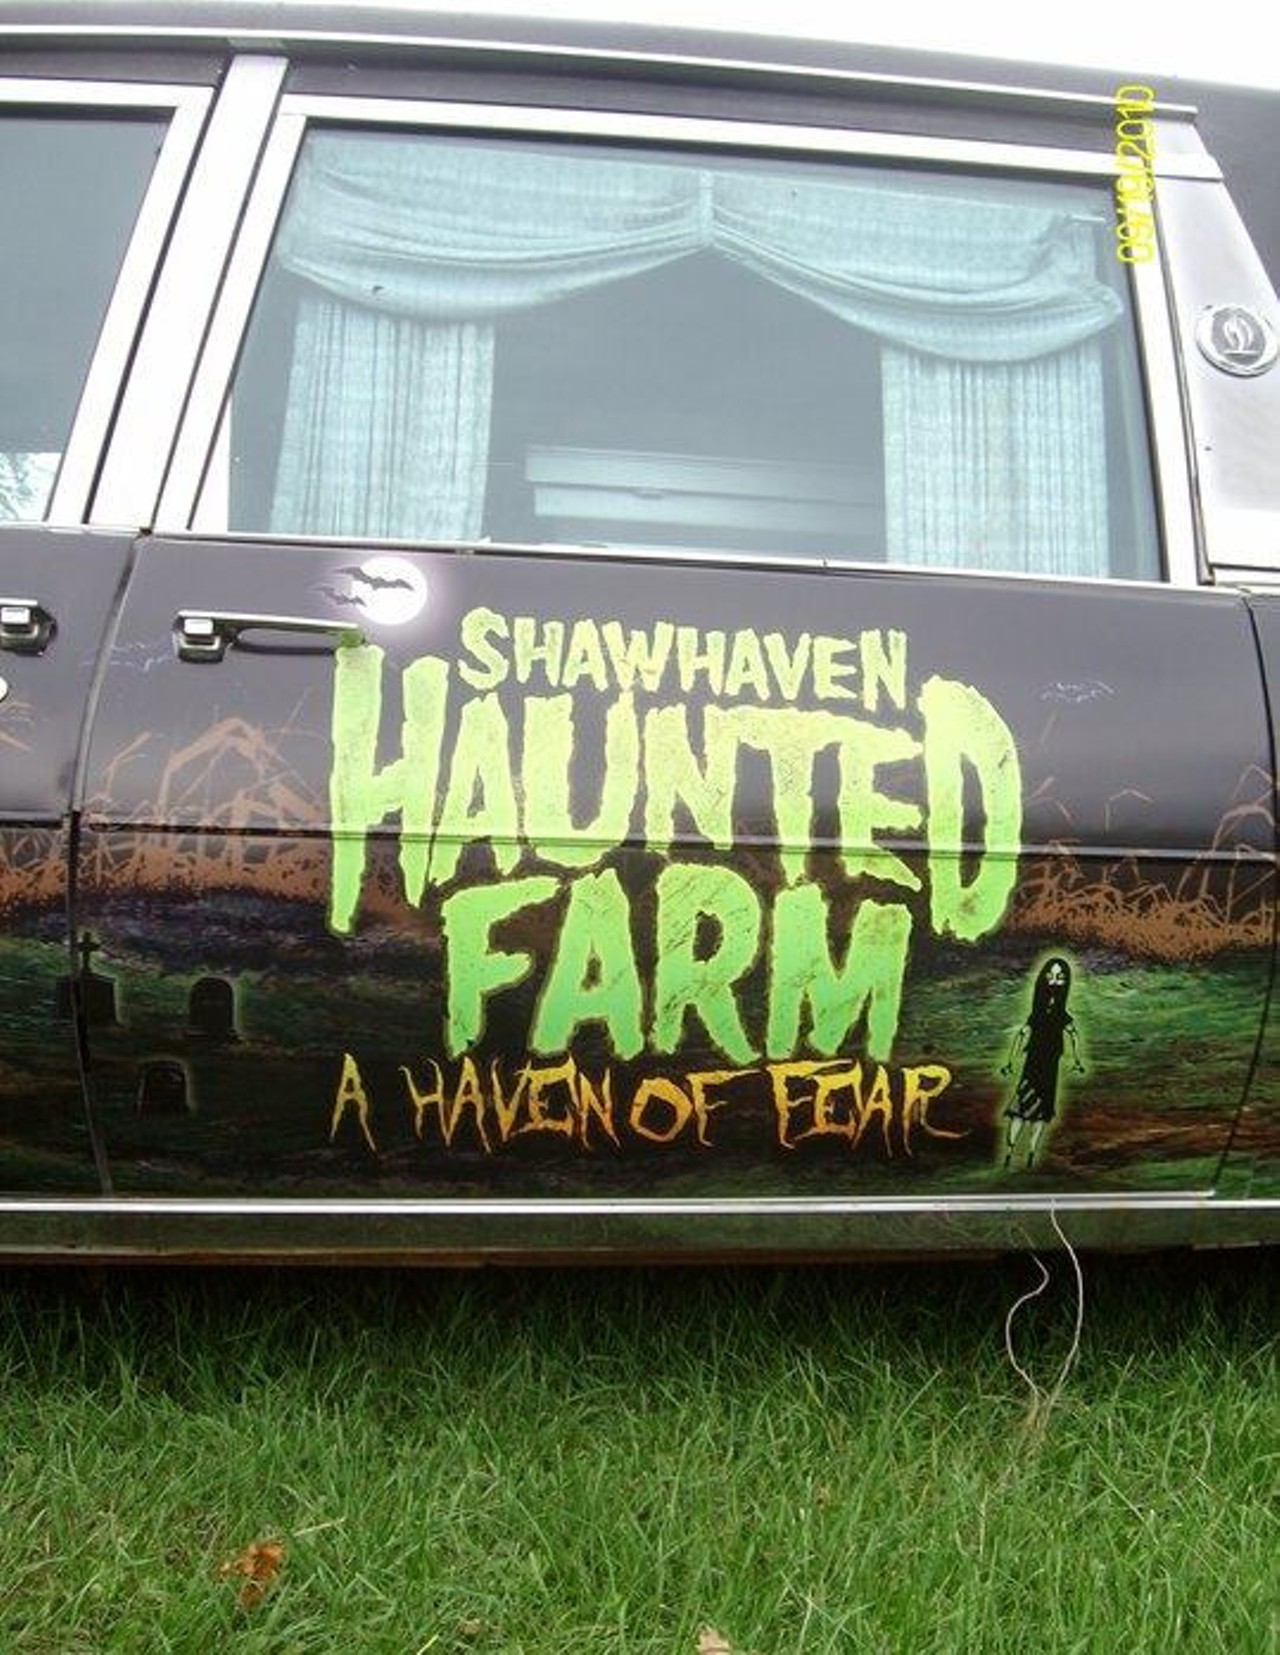 Shawhaven Farm
1826 Rolfe Rd, Mason
517-676-1649
Open with activities all year round, October is when all 140 acres of Shawhaven Farm becomes populated with the things that go bump in the night. Possessing attractions such as Dead Maze and Farm House Escape, this farm will be a host to many fun scares and challenges. Photo courtesy of Facebook